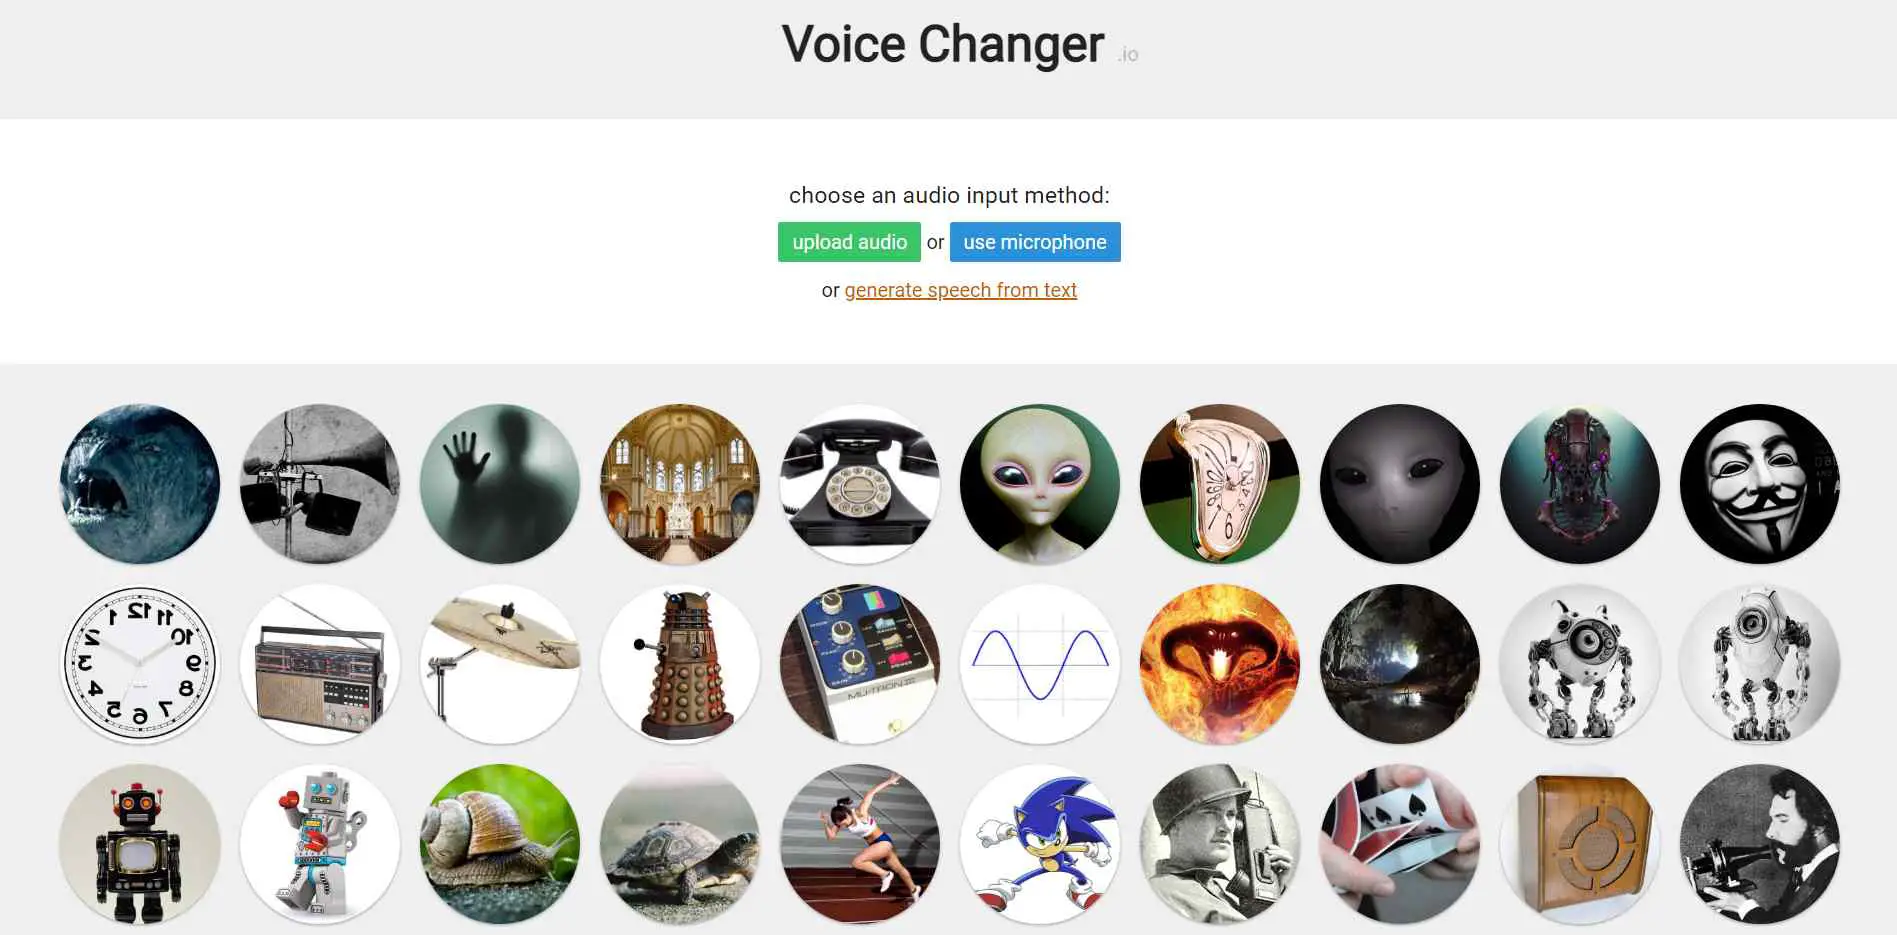 VoiceChanger.io is yet another online tool for transforming your voice.